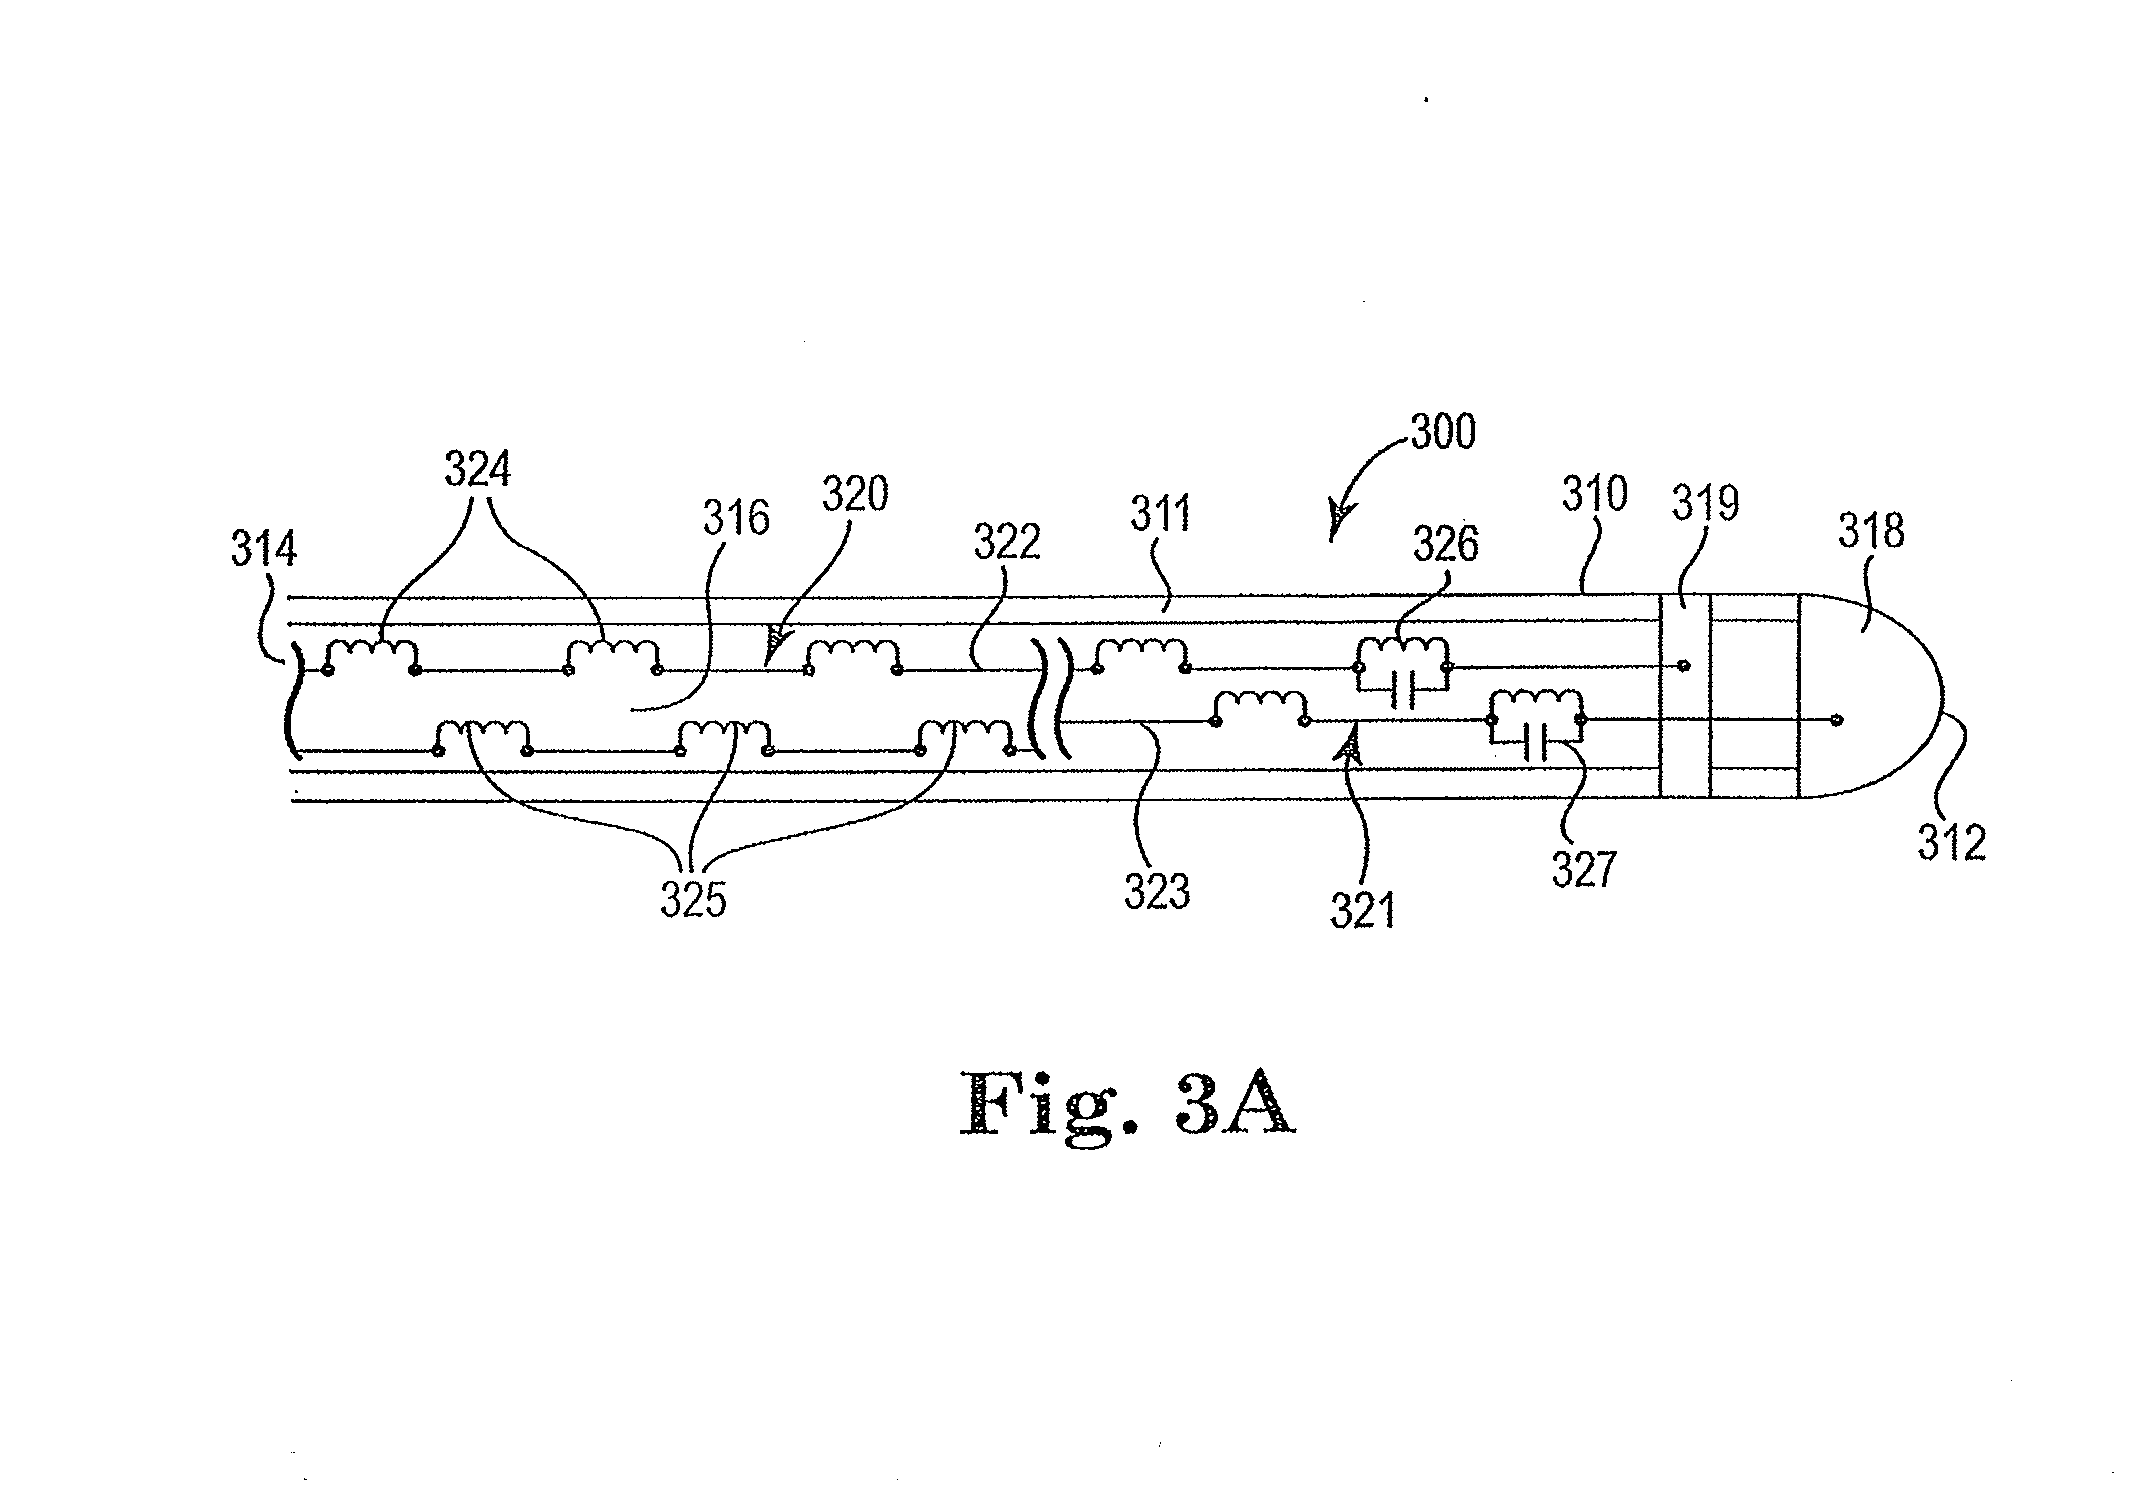 MRI compatible co-radially wound lead assembly